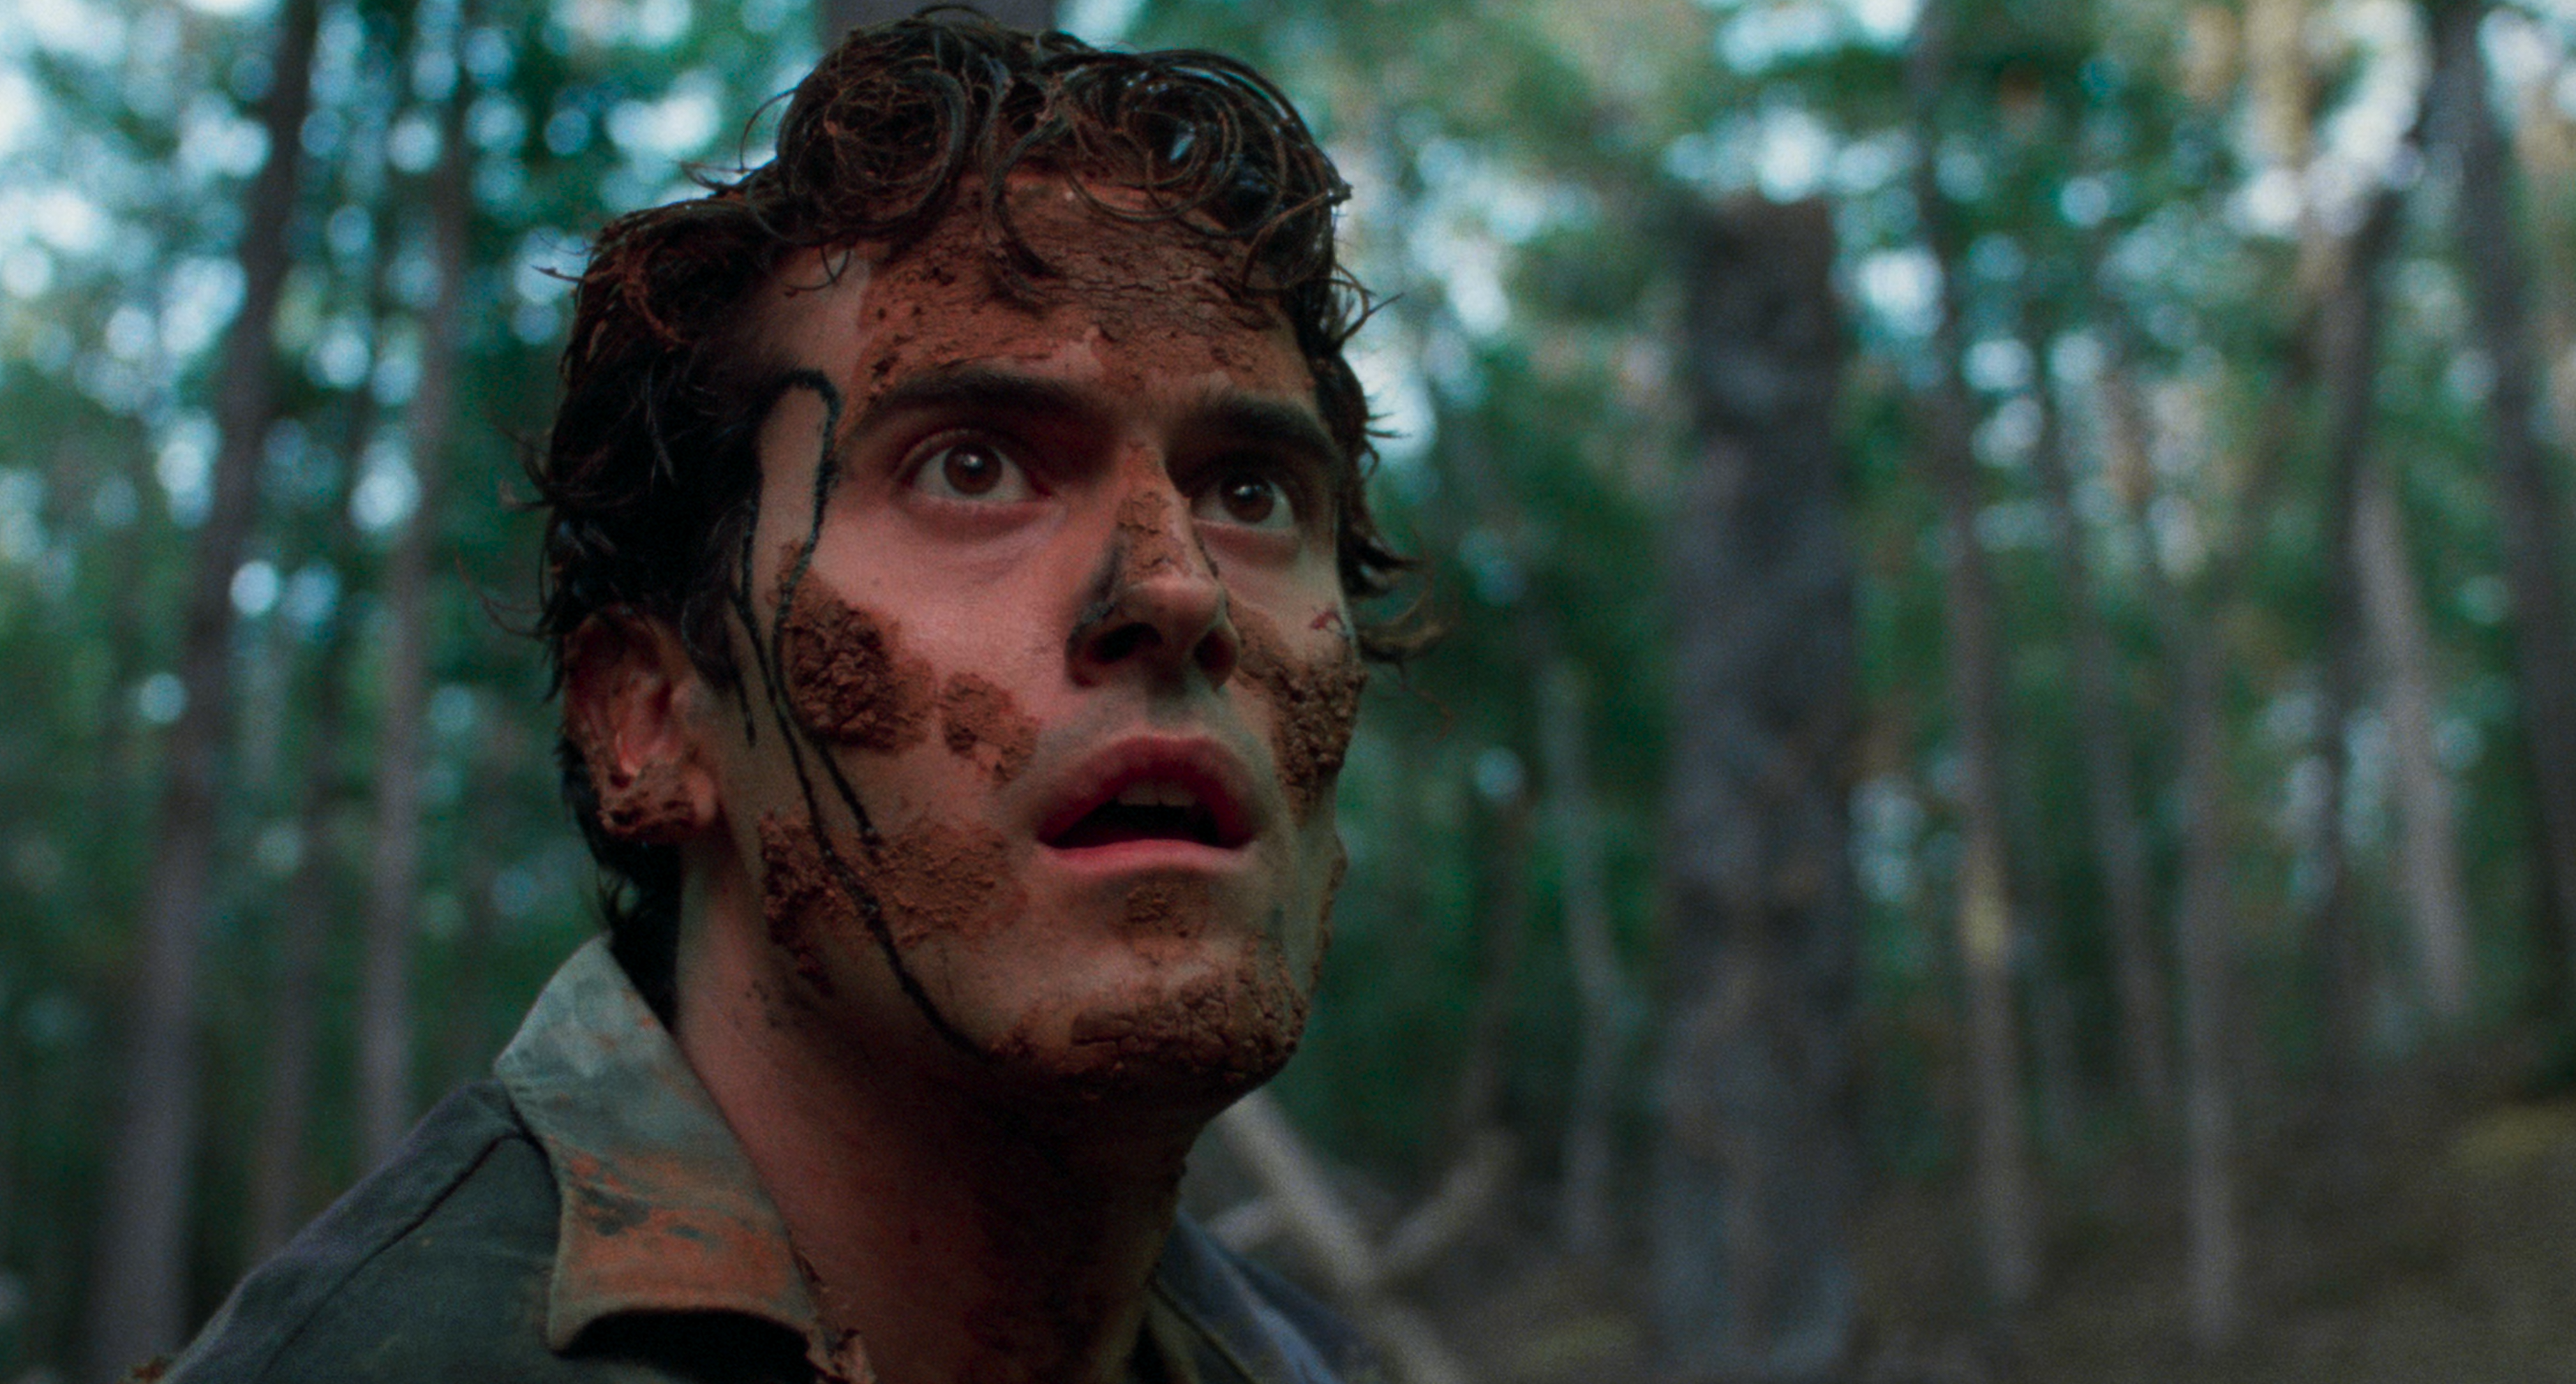 Bruce Campbell has dirt on his face and all in his hair while he looks up surprised in a forest in The Evil Dead.